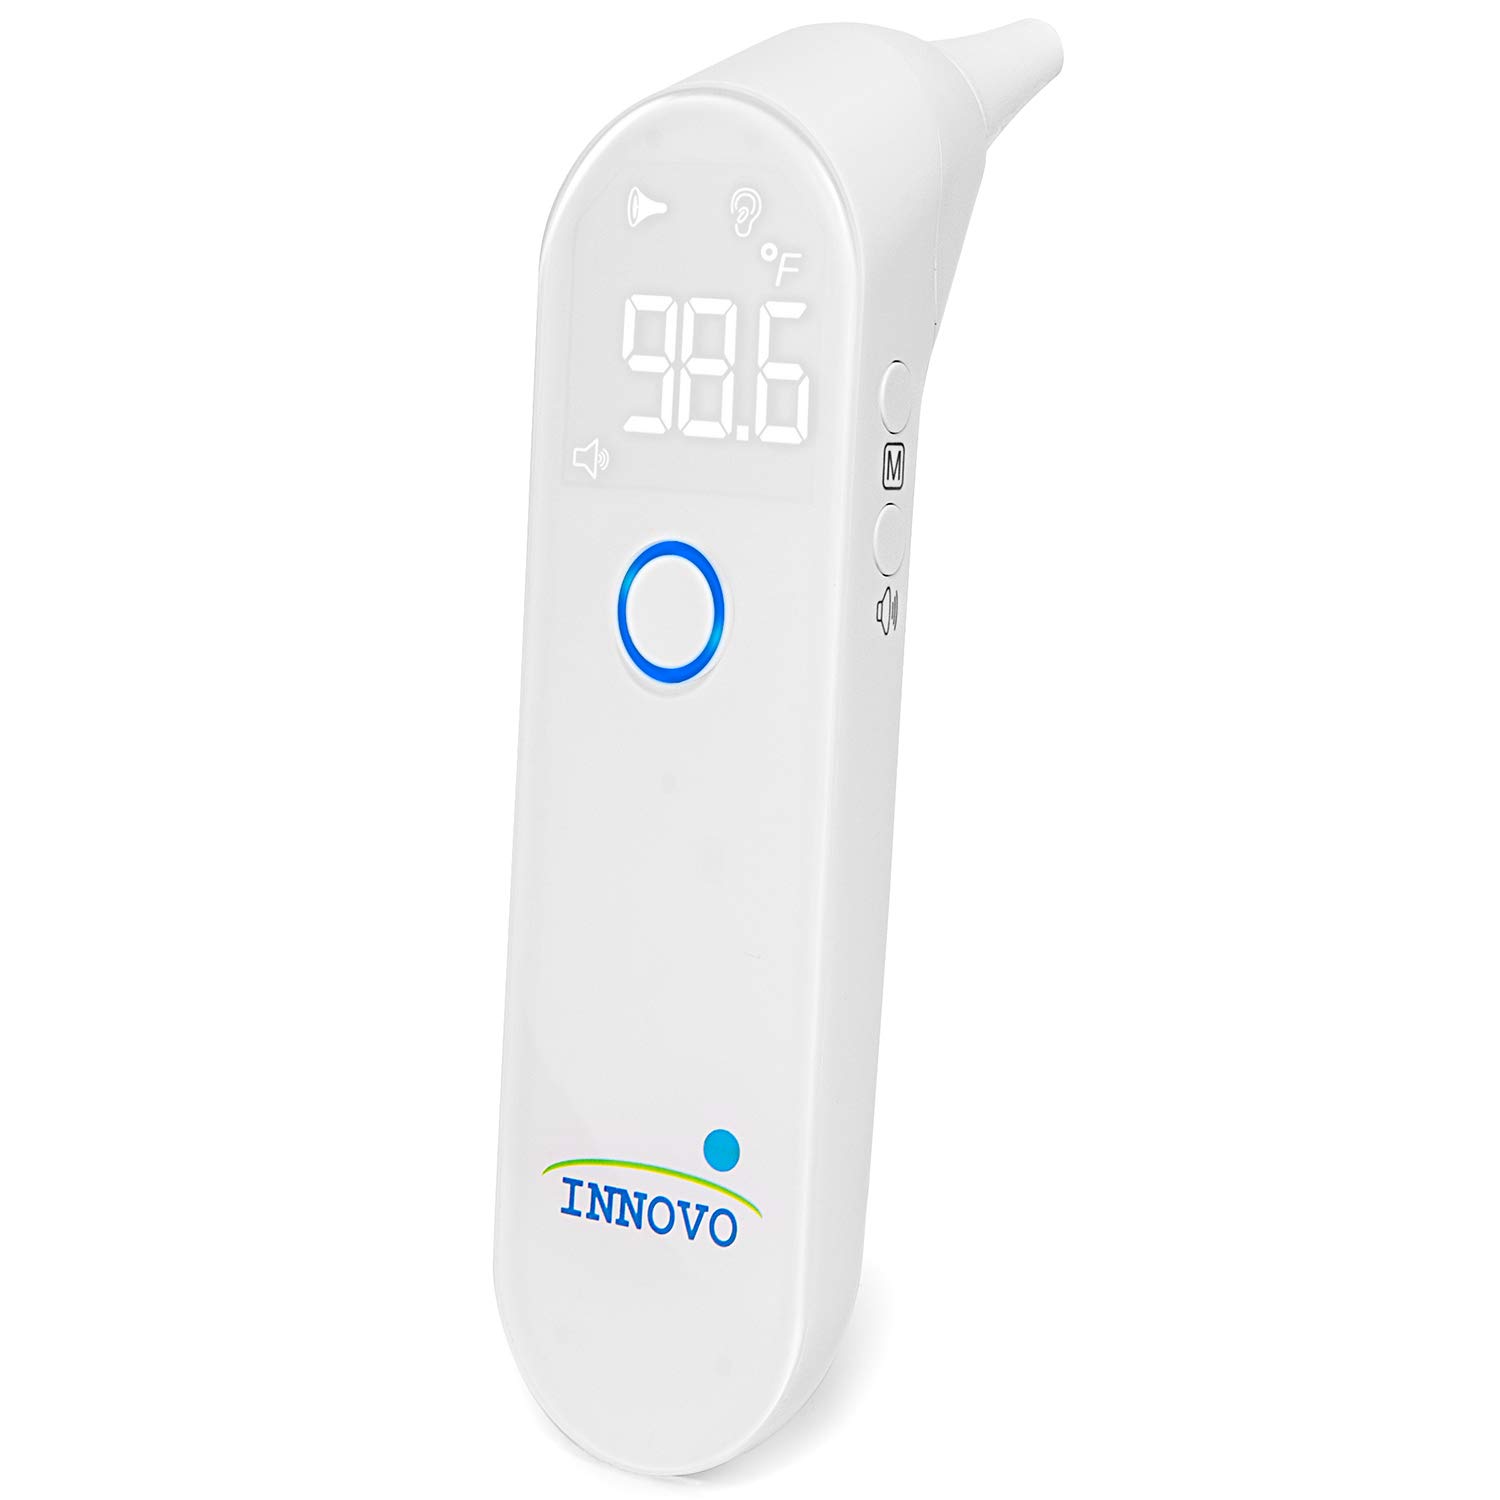 Ear Probe Covers for the Innovo Medical Ear and Surface Thermometer